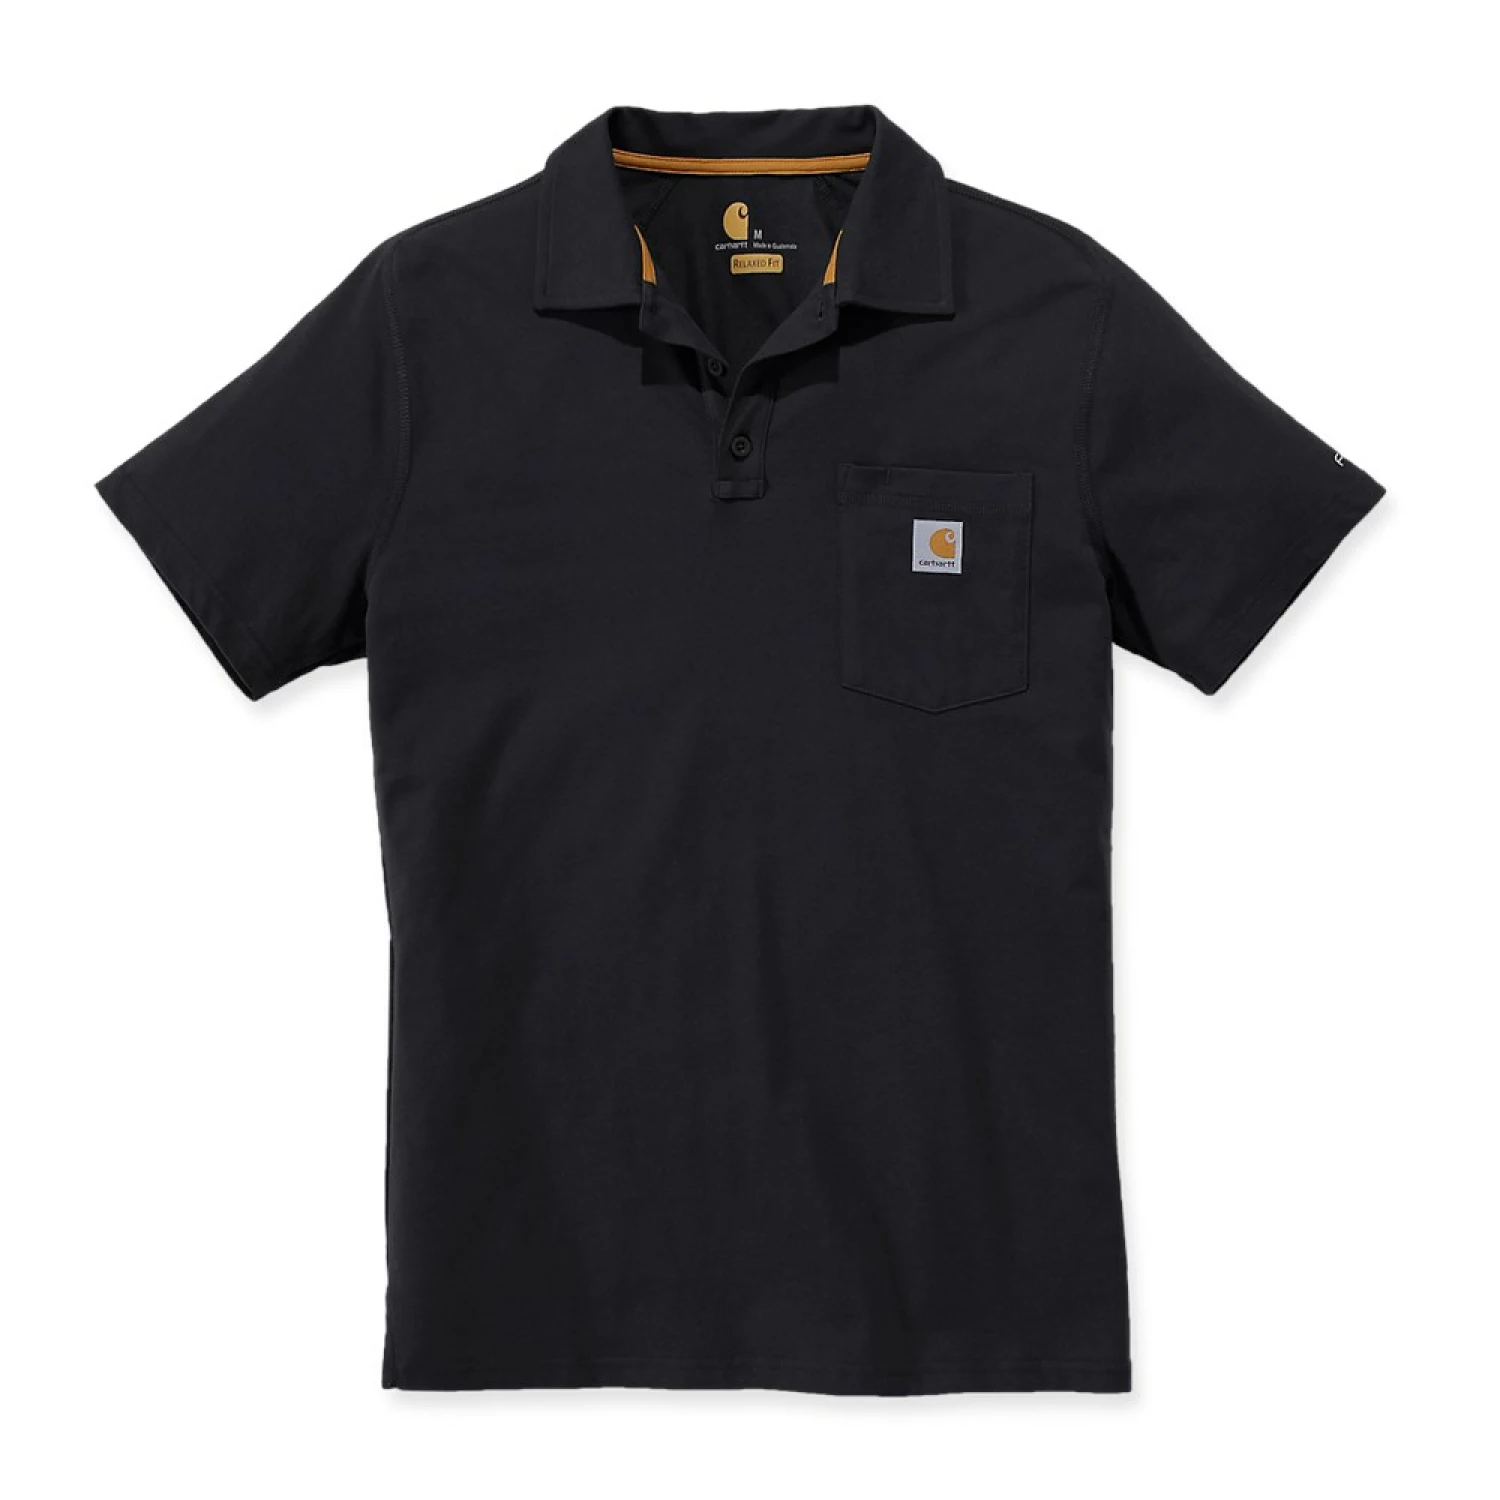 Carhartt 103569 Force Cotton Delmont Pocket Polo - Relaxed Fit - Black - L-image